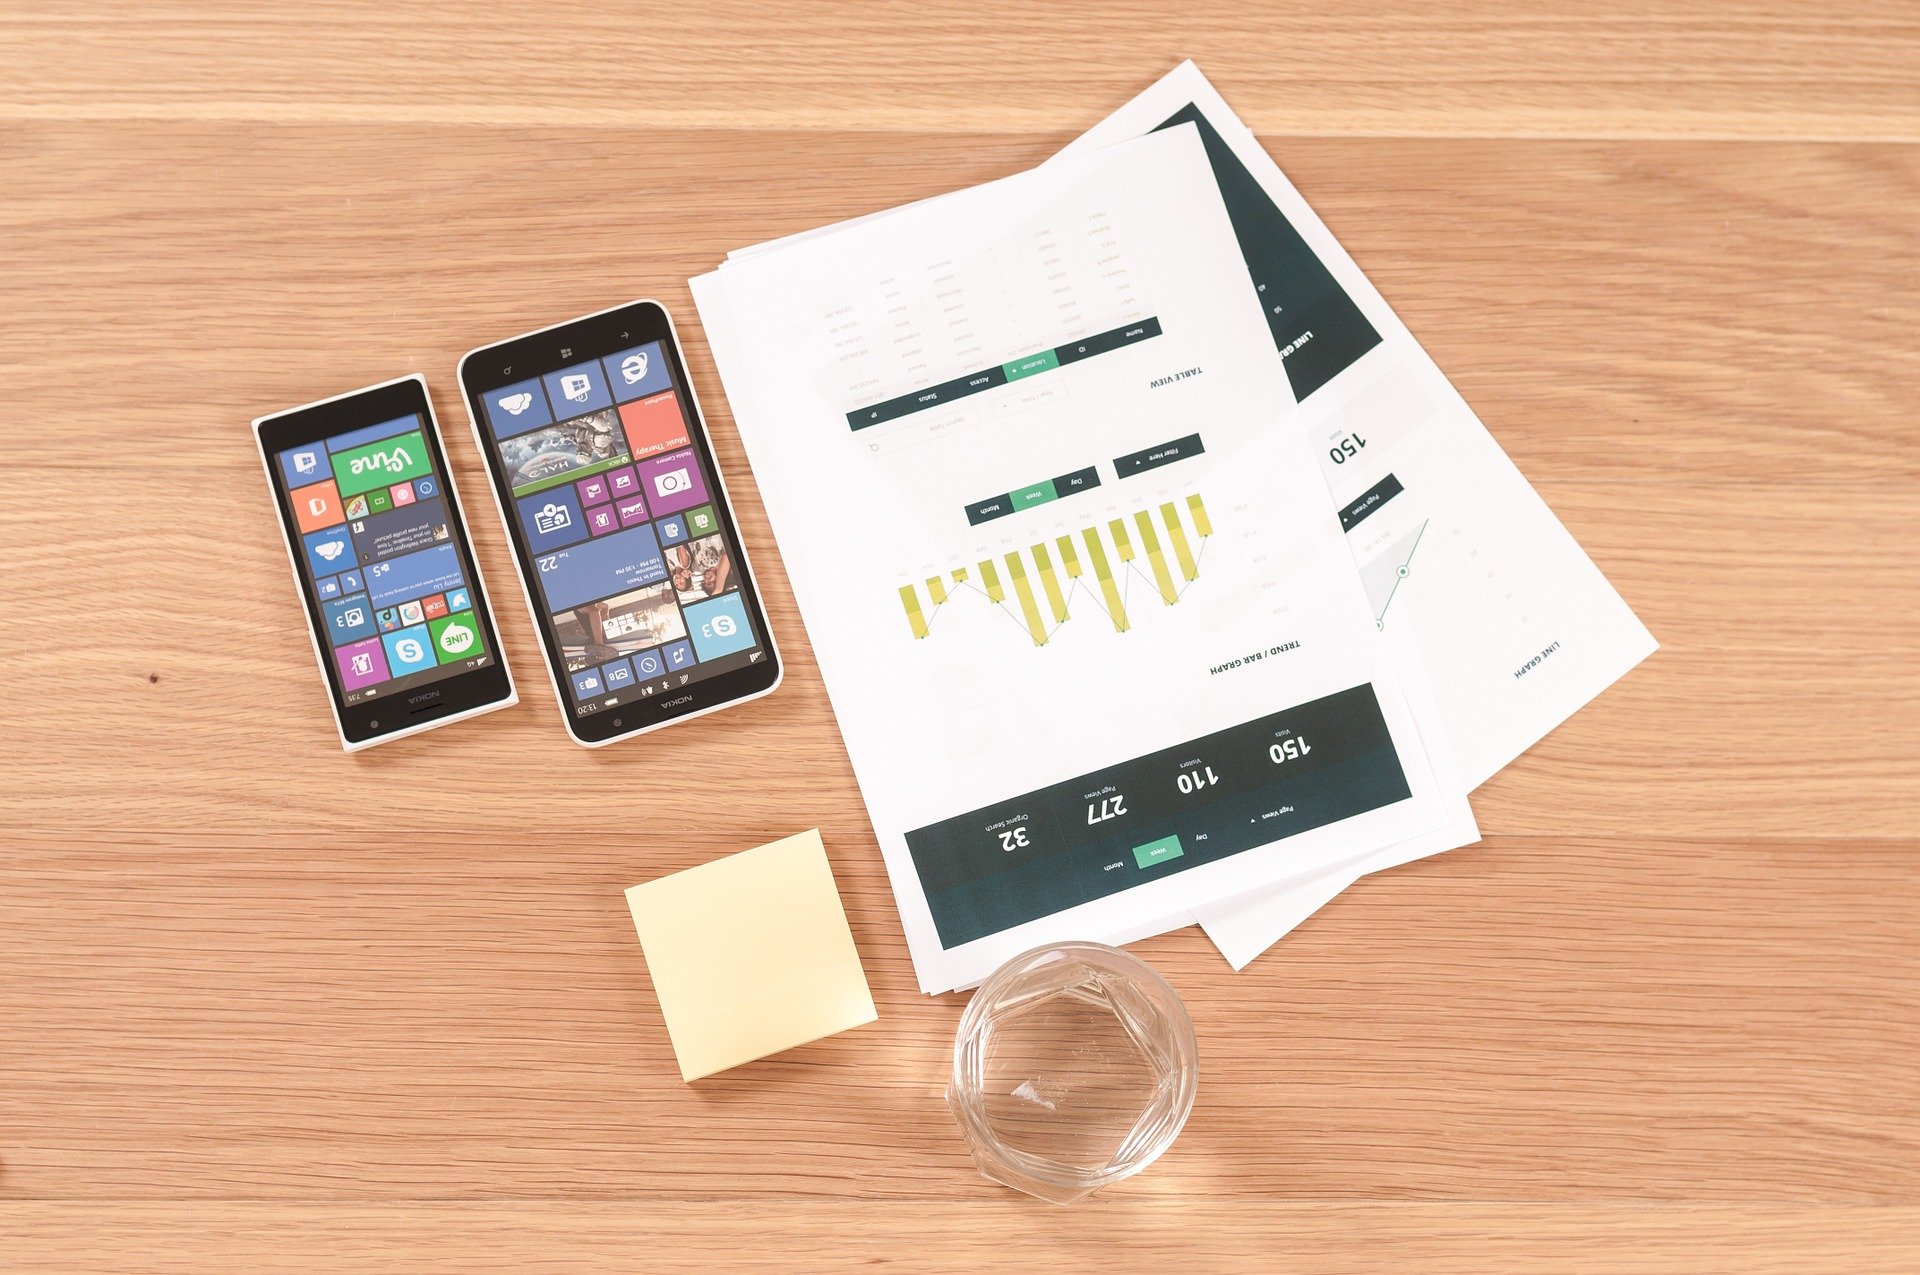 Top Ways in which your Brand benefits from a Mobile App Development Company